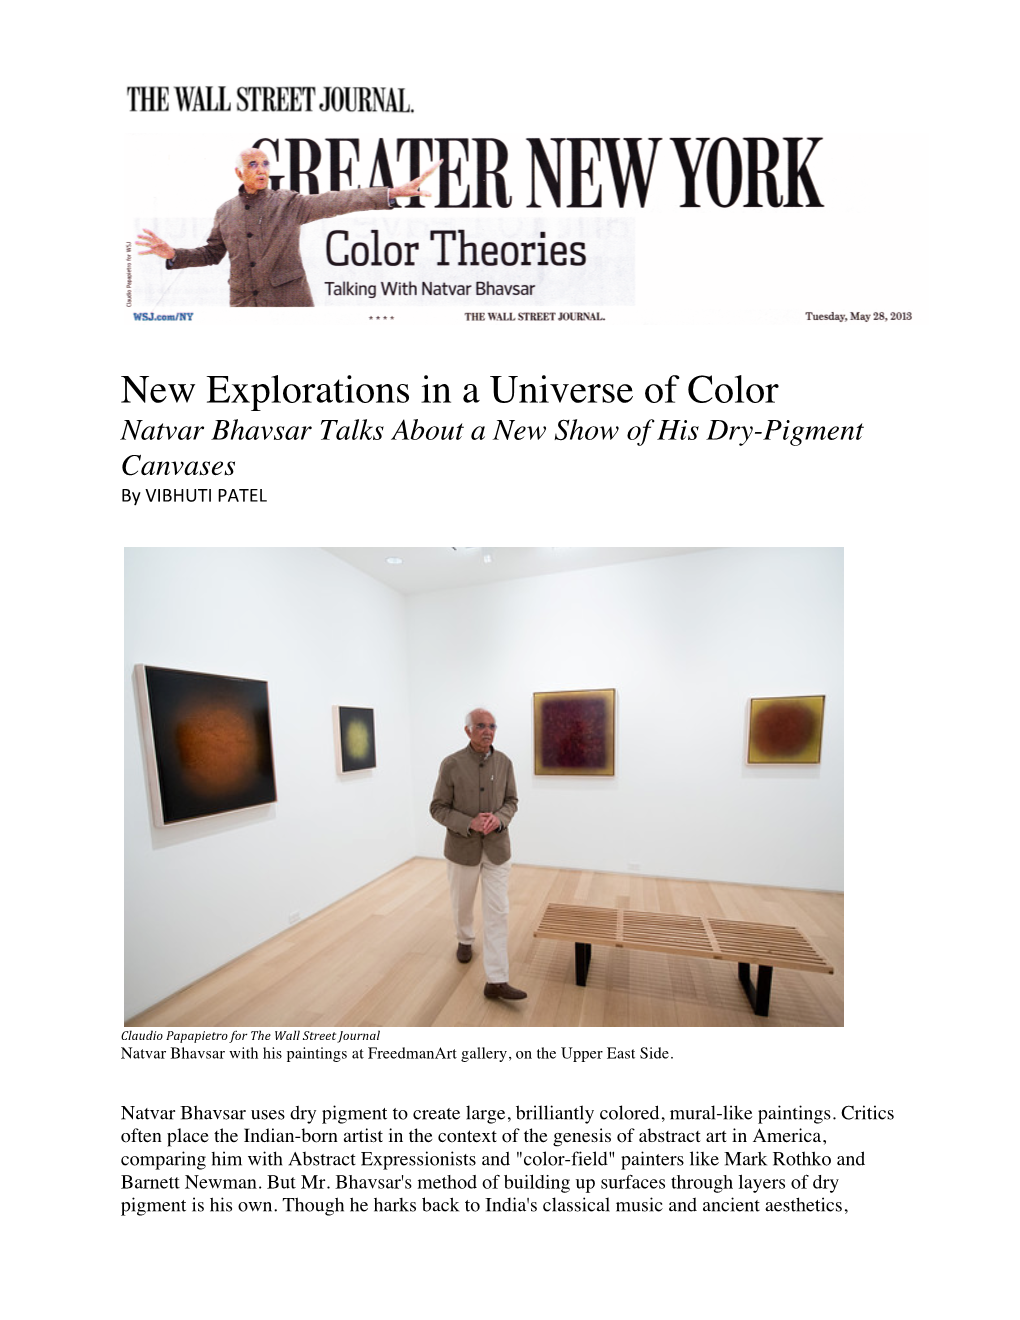 New Explorations in a Universe of Color Natvar Bhavsar Talks About a New Show of His Dry-Pigment Canvases by VIBHUTI PATEL